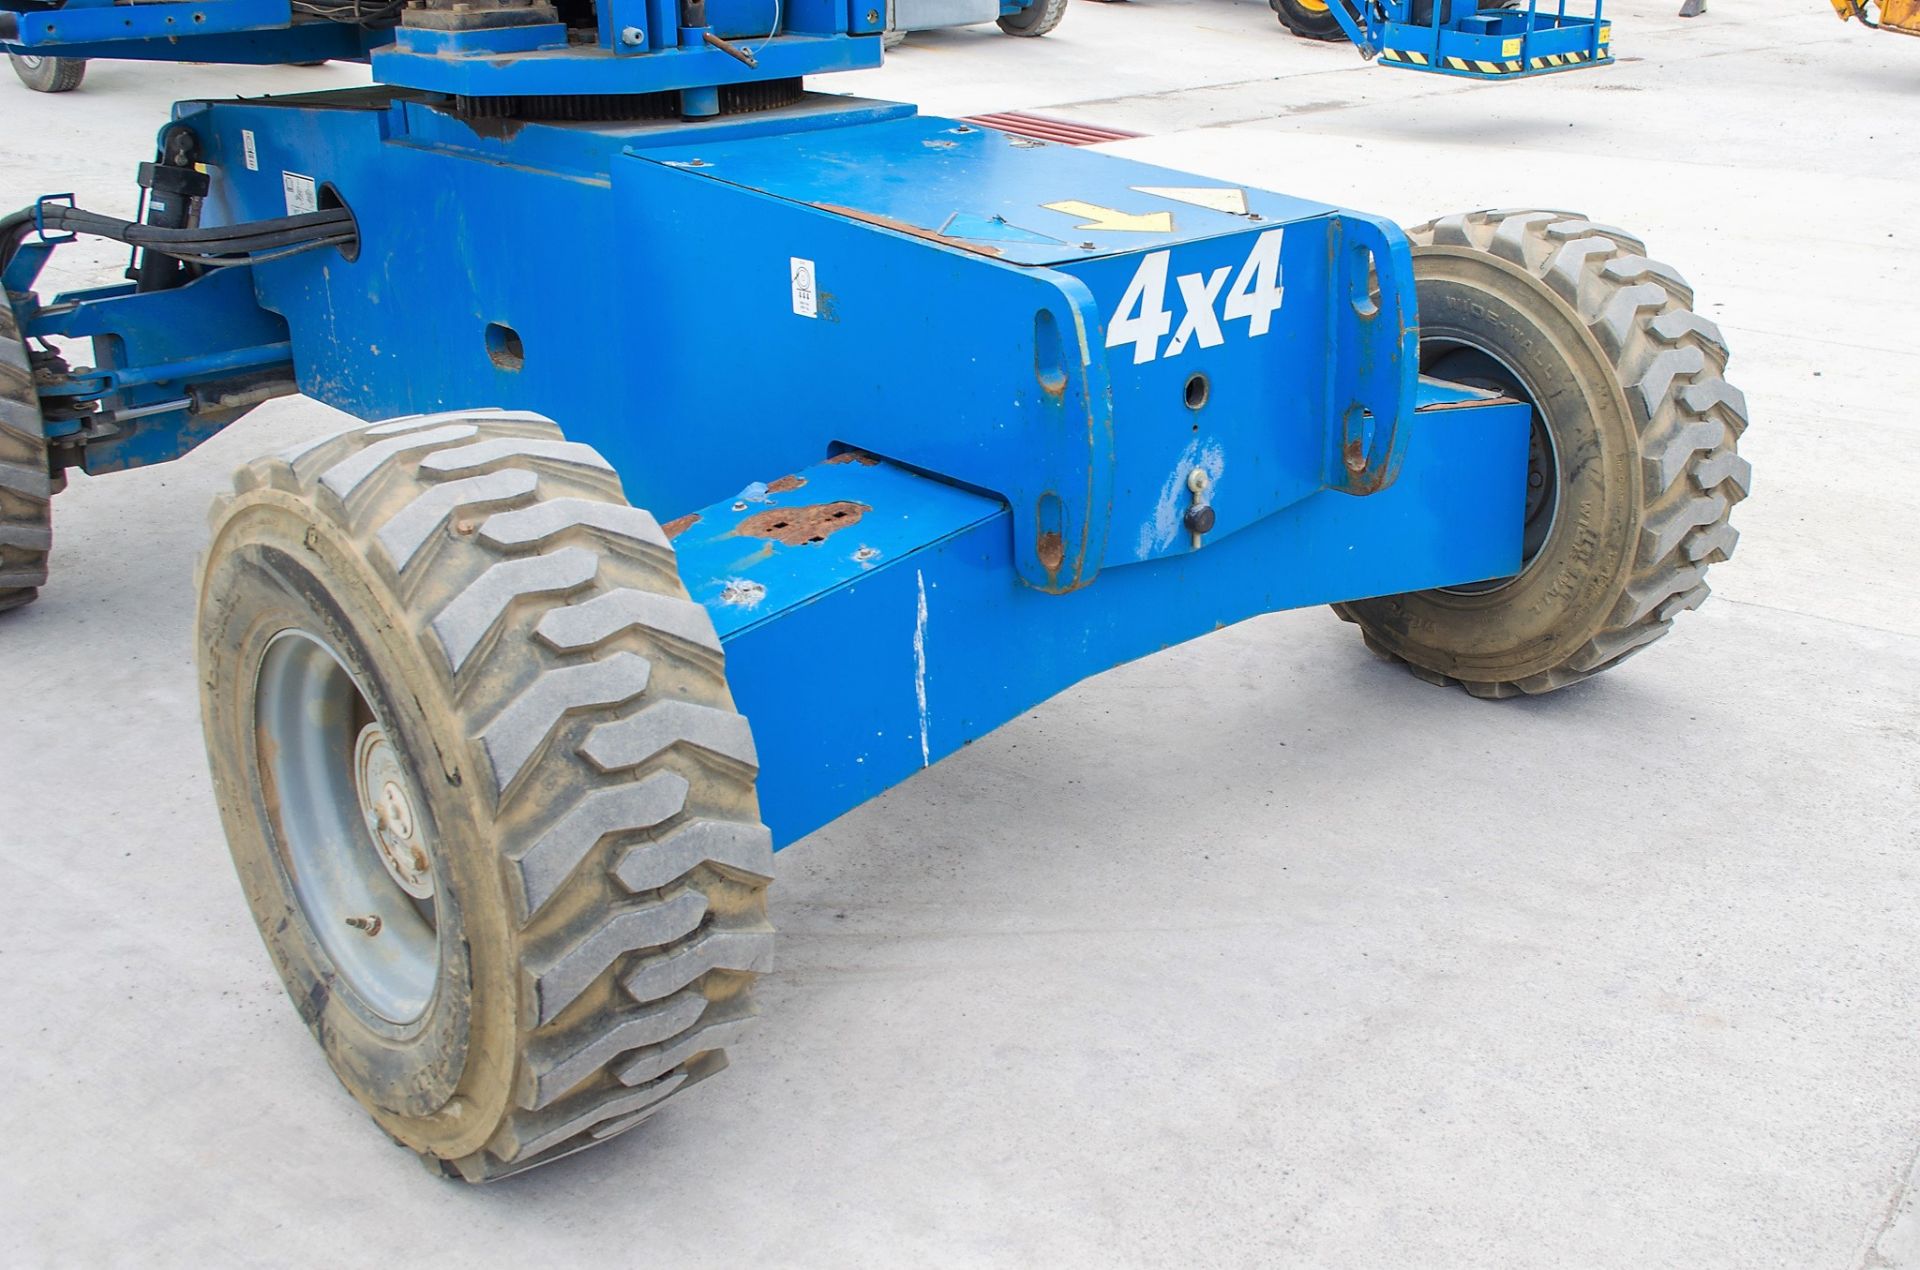 Genie S-45 diesel driven 45 ft boom lift access platform Year: 2014 S/N: 54514-18197 Recorded Hours: - Image 11 of 18